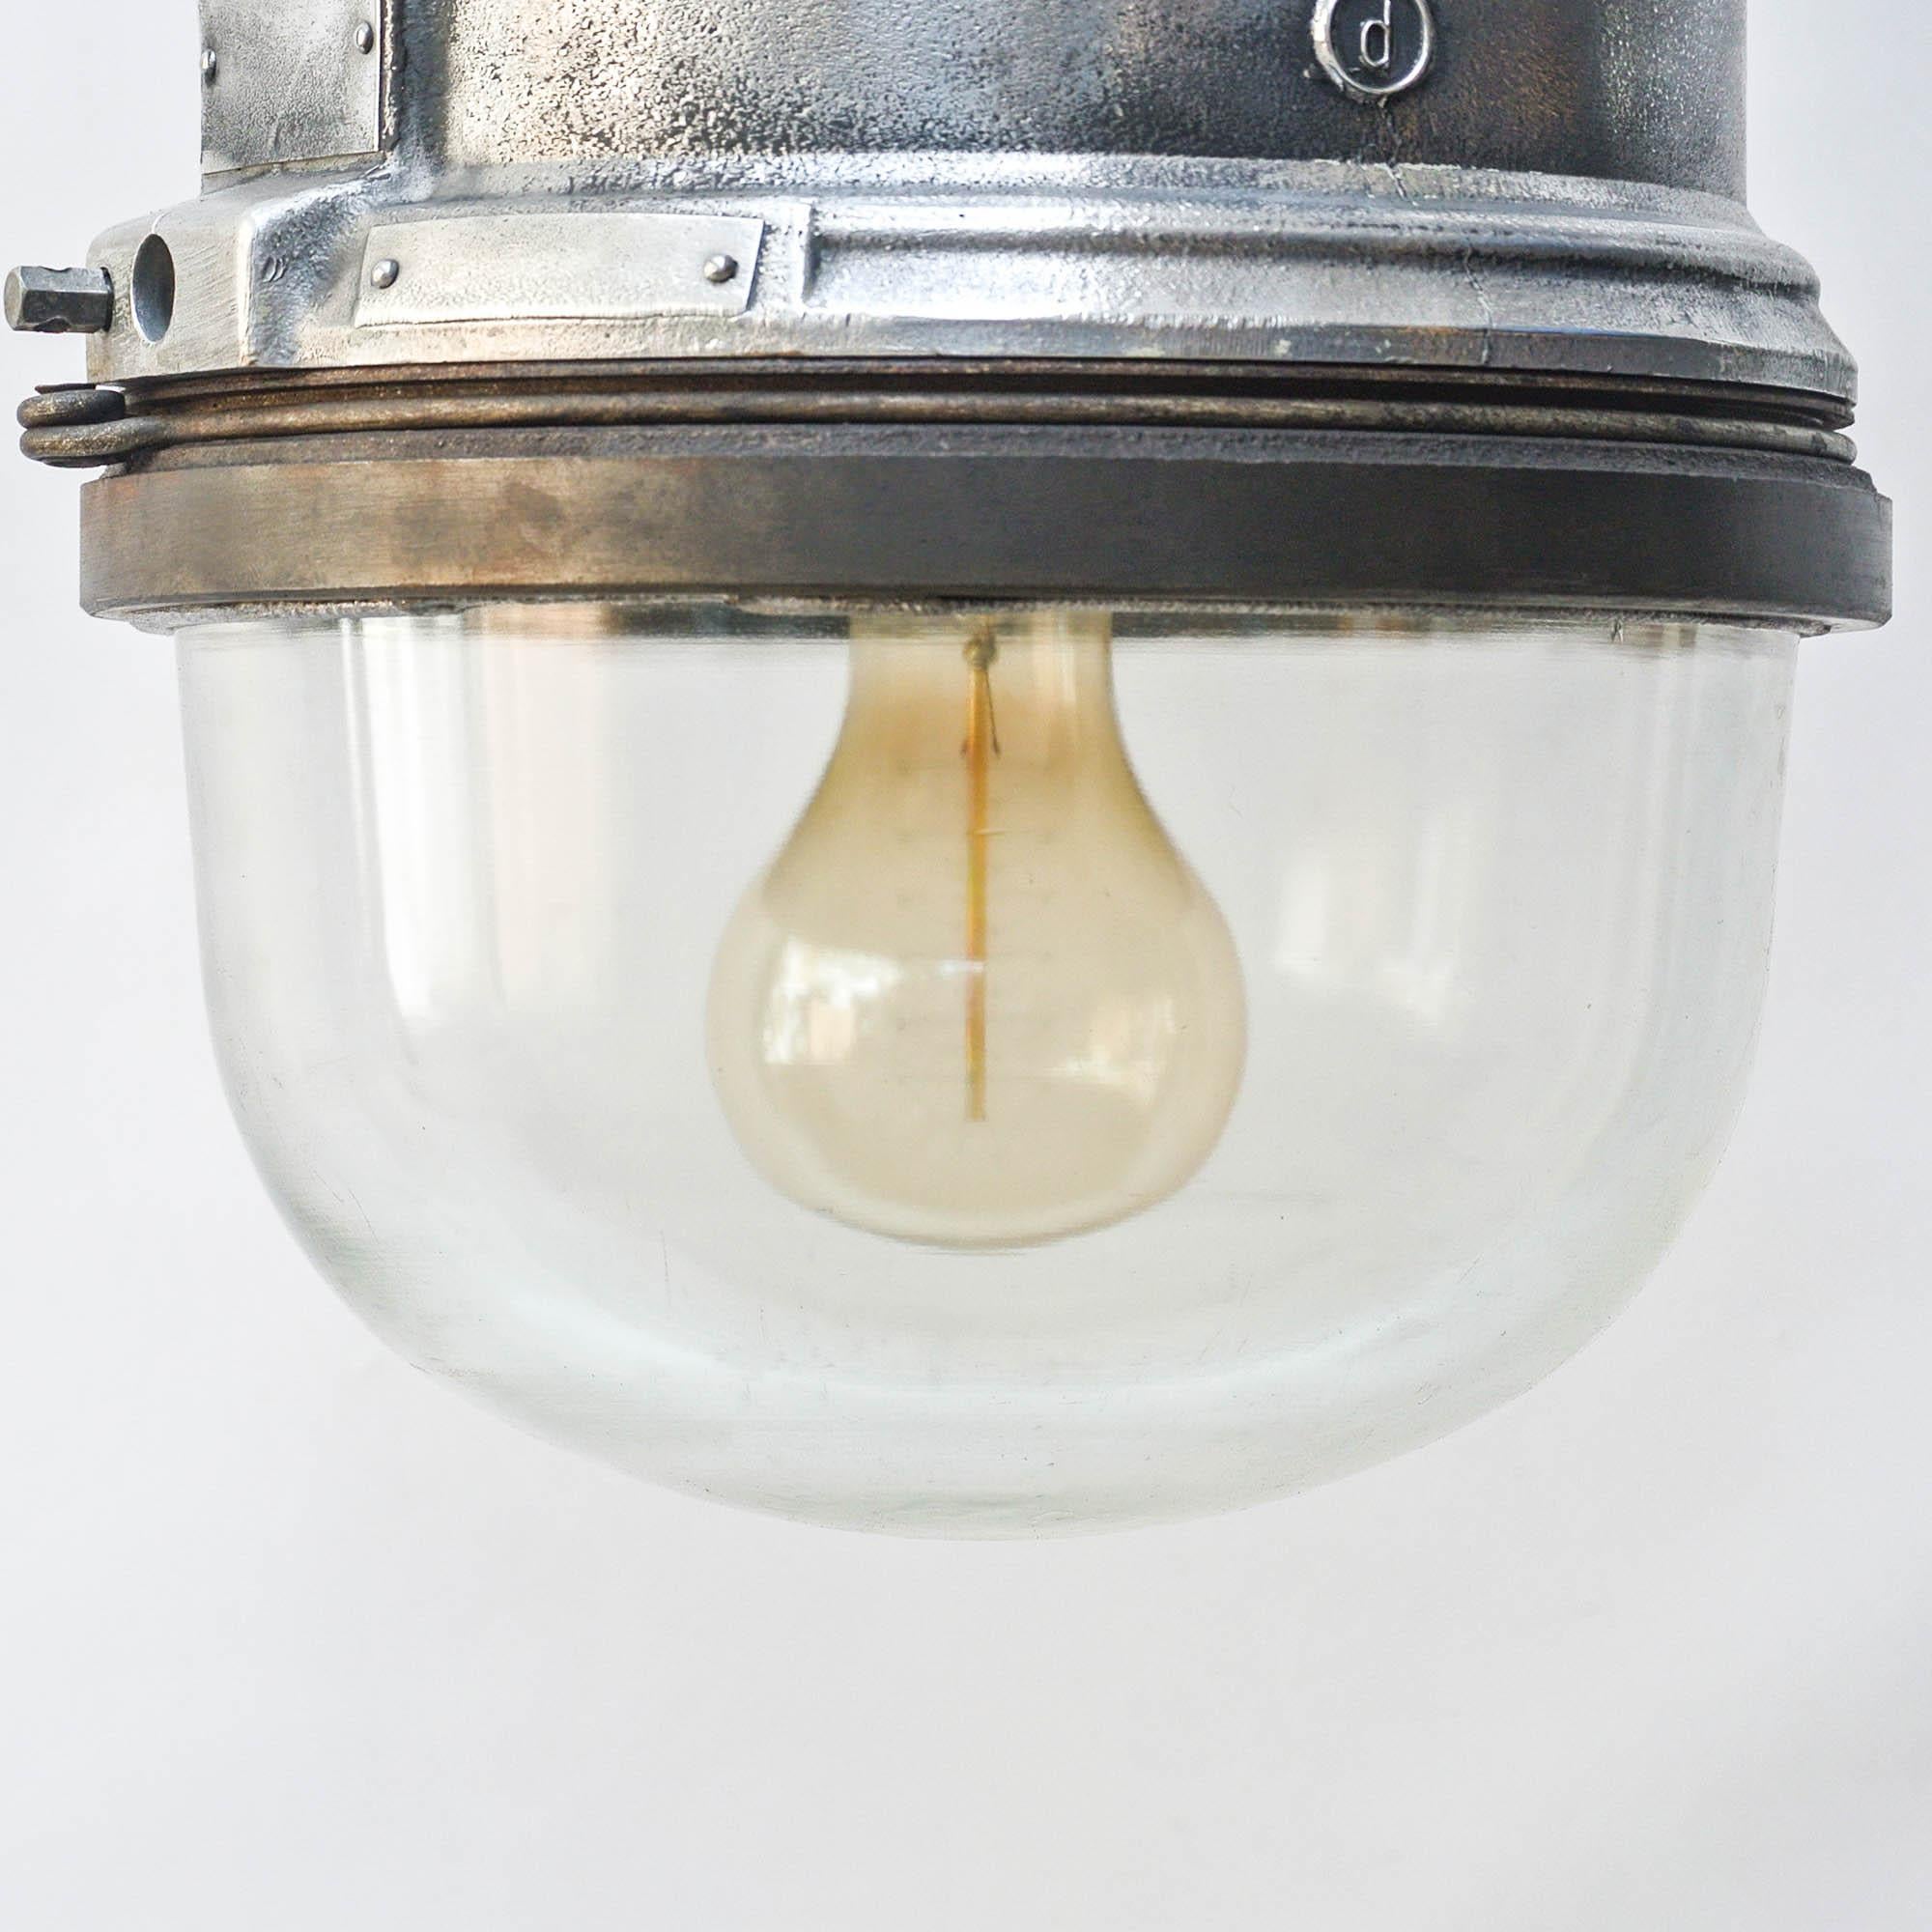 Industrial Explosion-Proof Light Used in Chemical Industry Germany, circa 1960-1969 For Sale